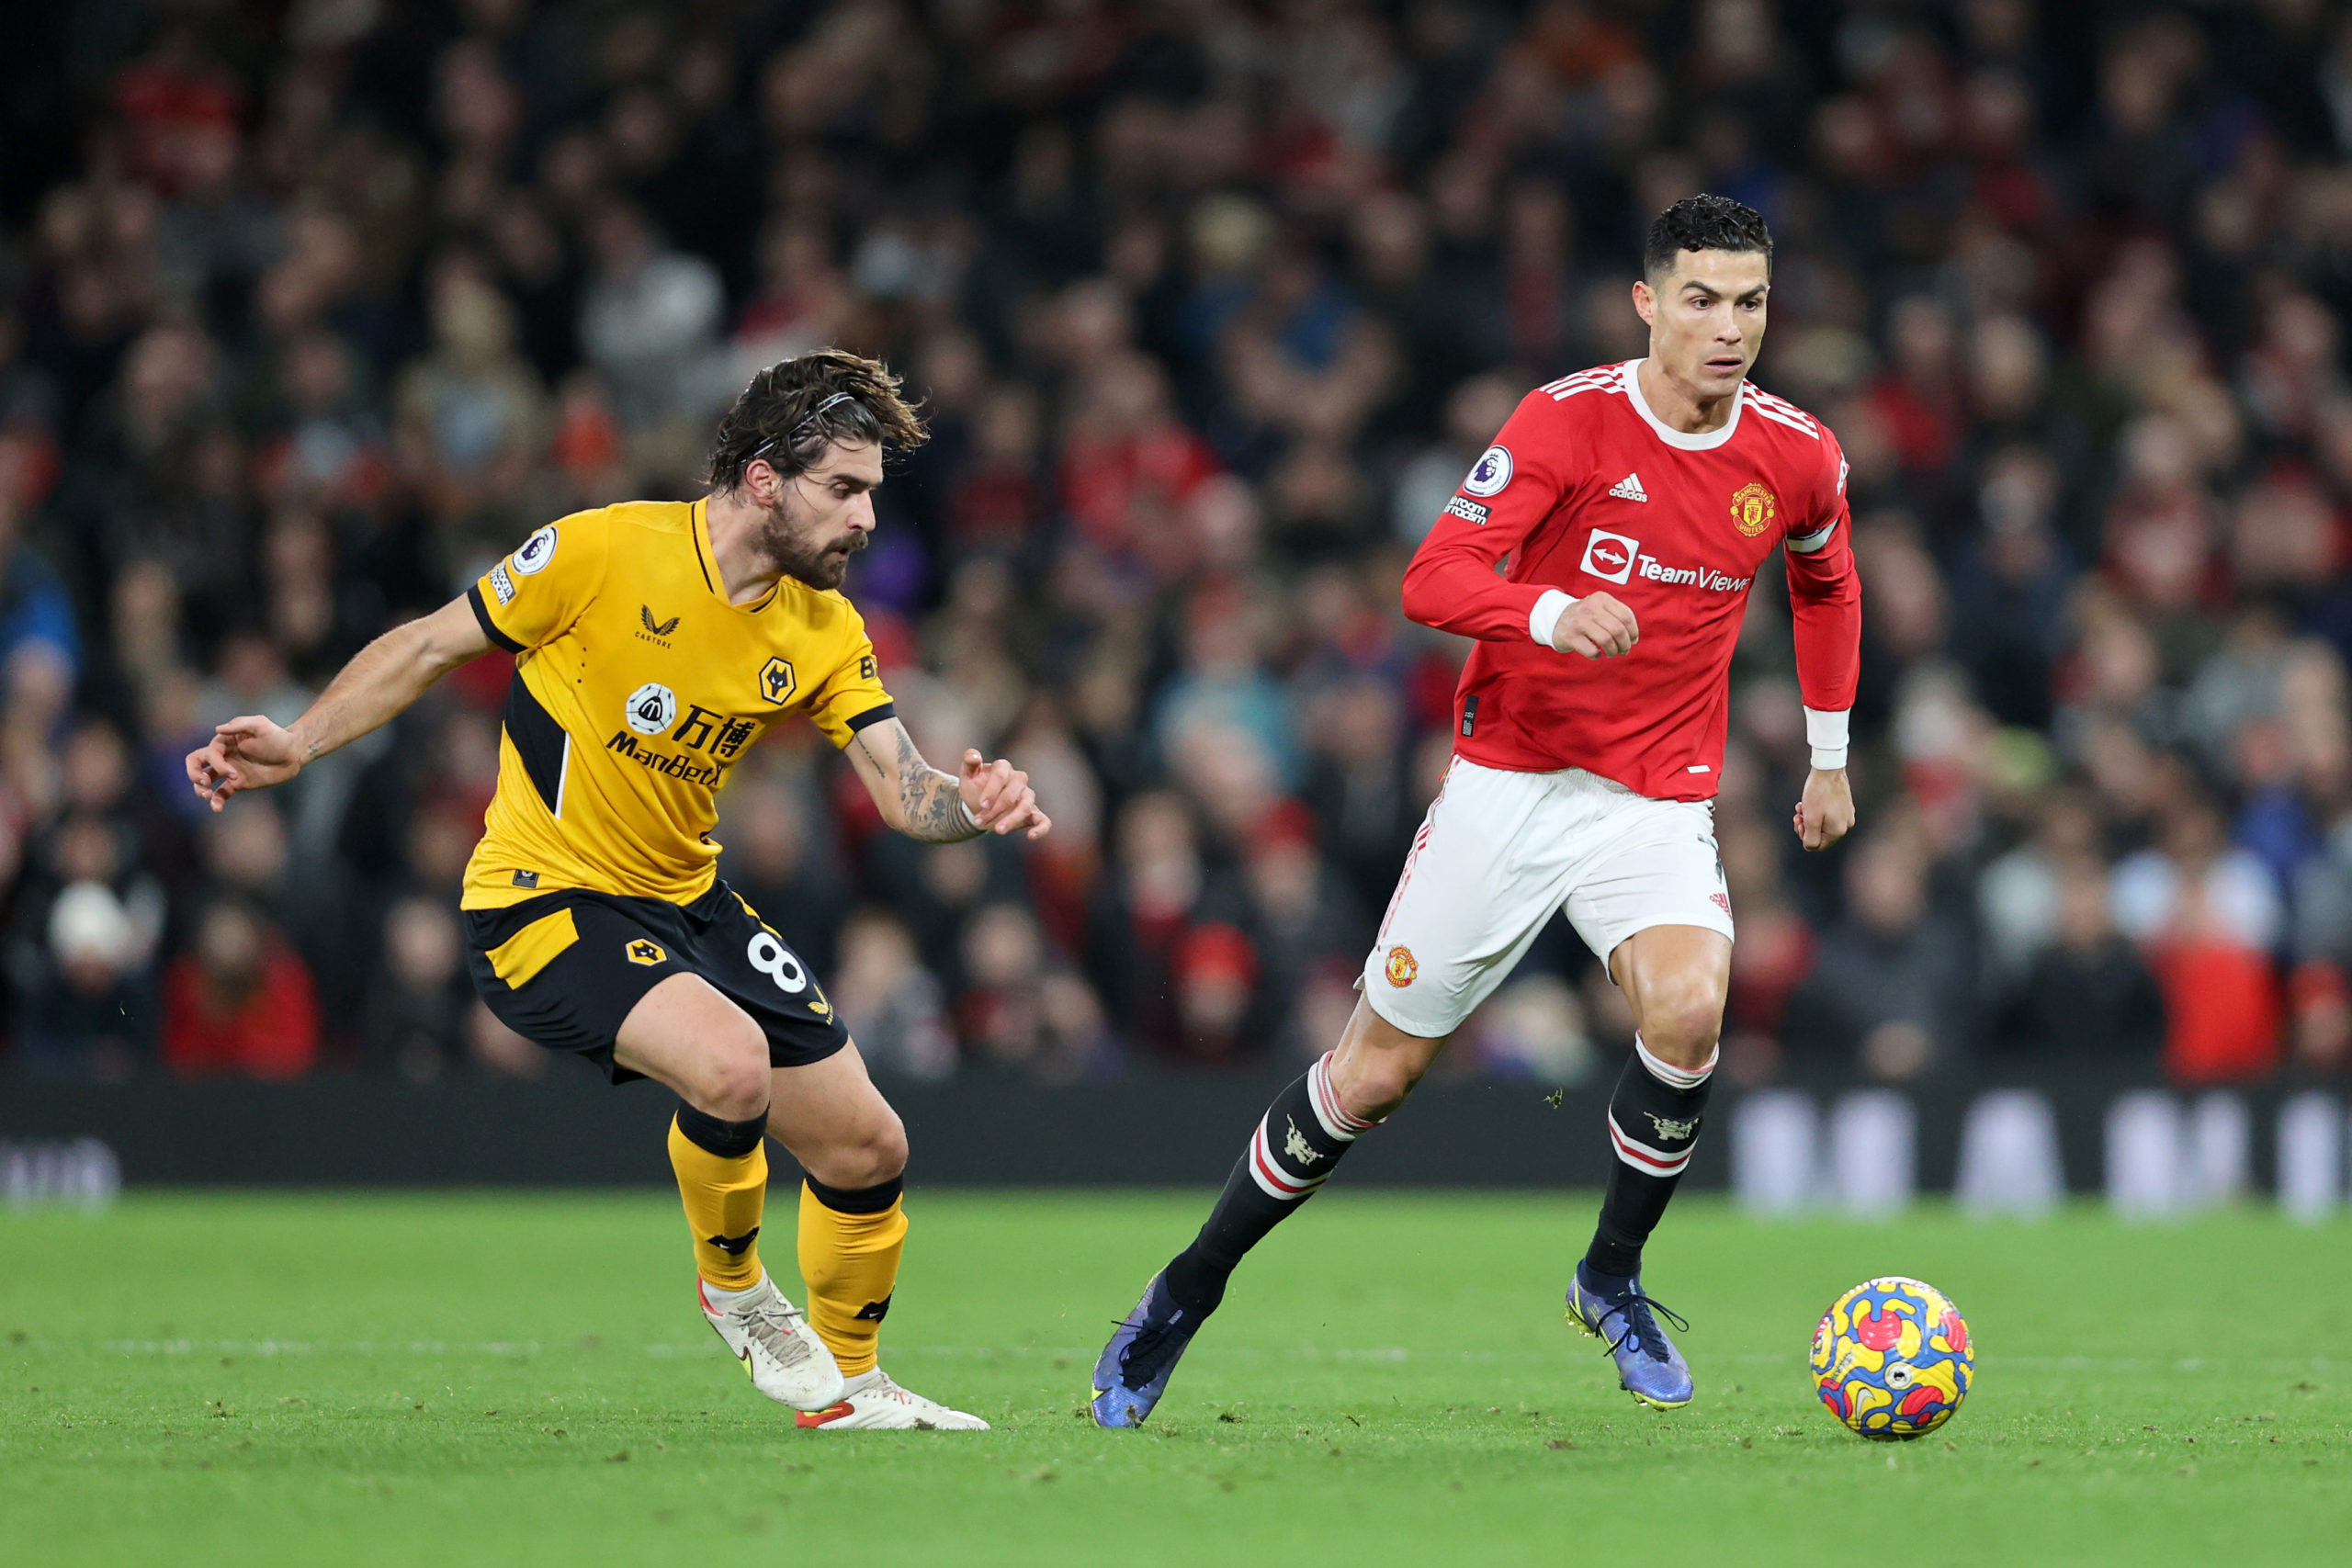       Manchester united in though battle with Barcelona to sign wolves super midfielder